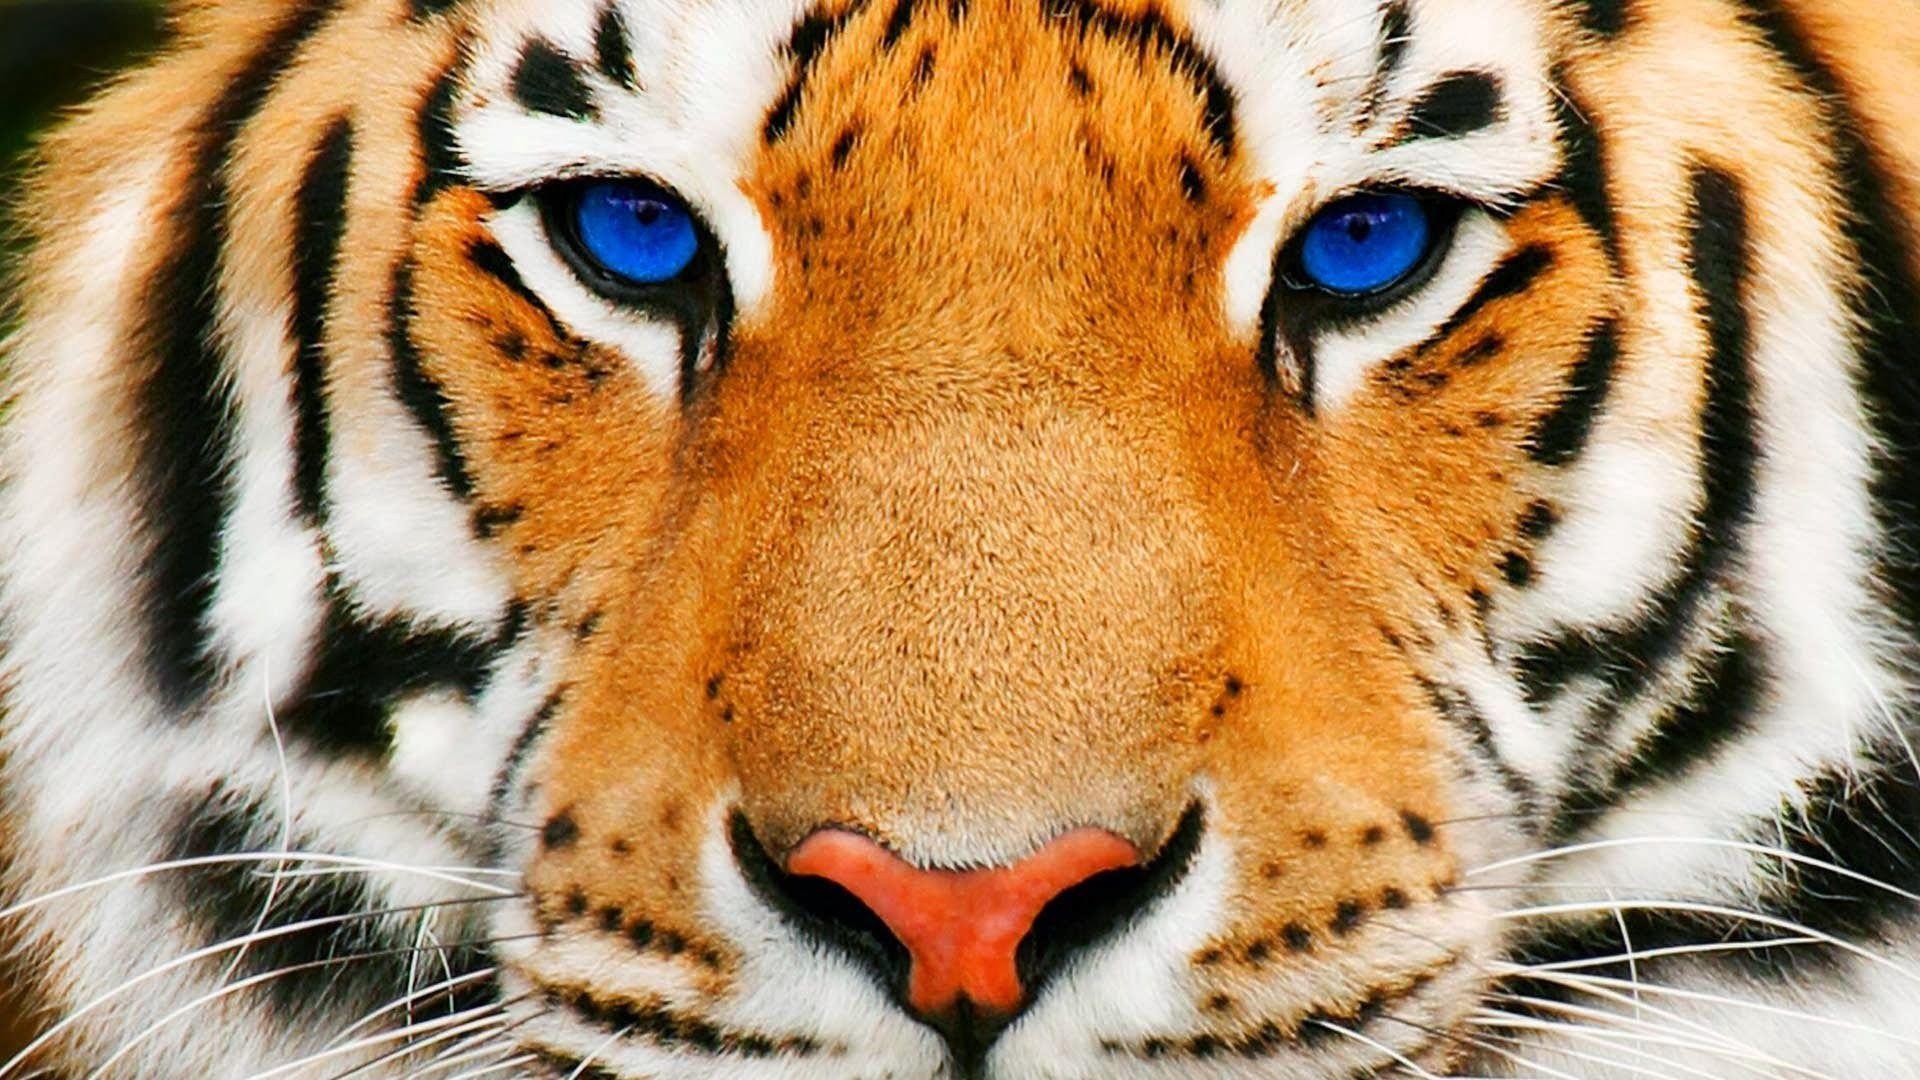 Wallpapers For > Tiger Face Wallpapers Hd